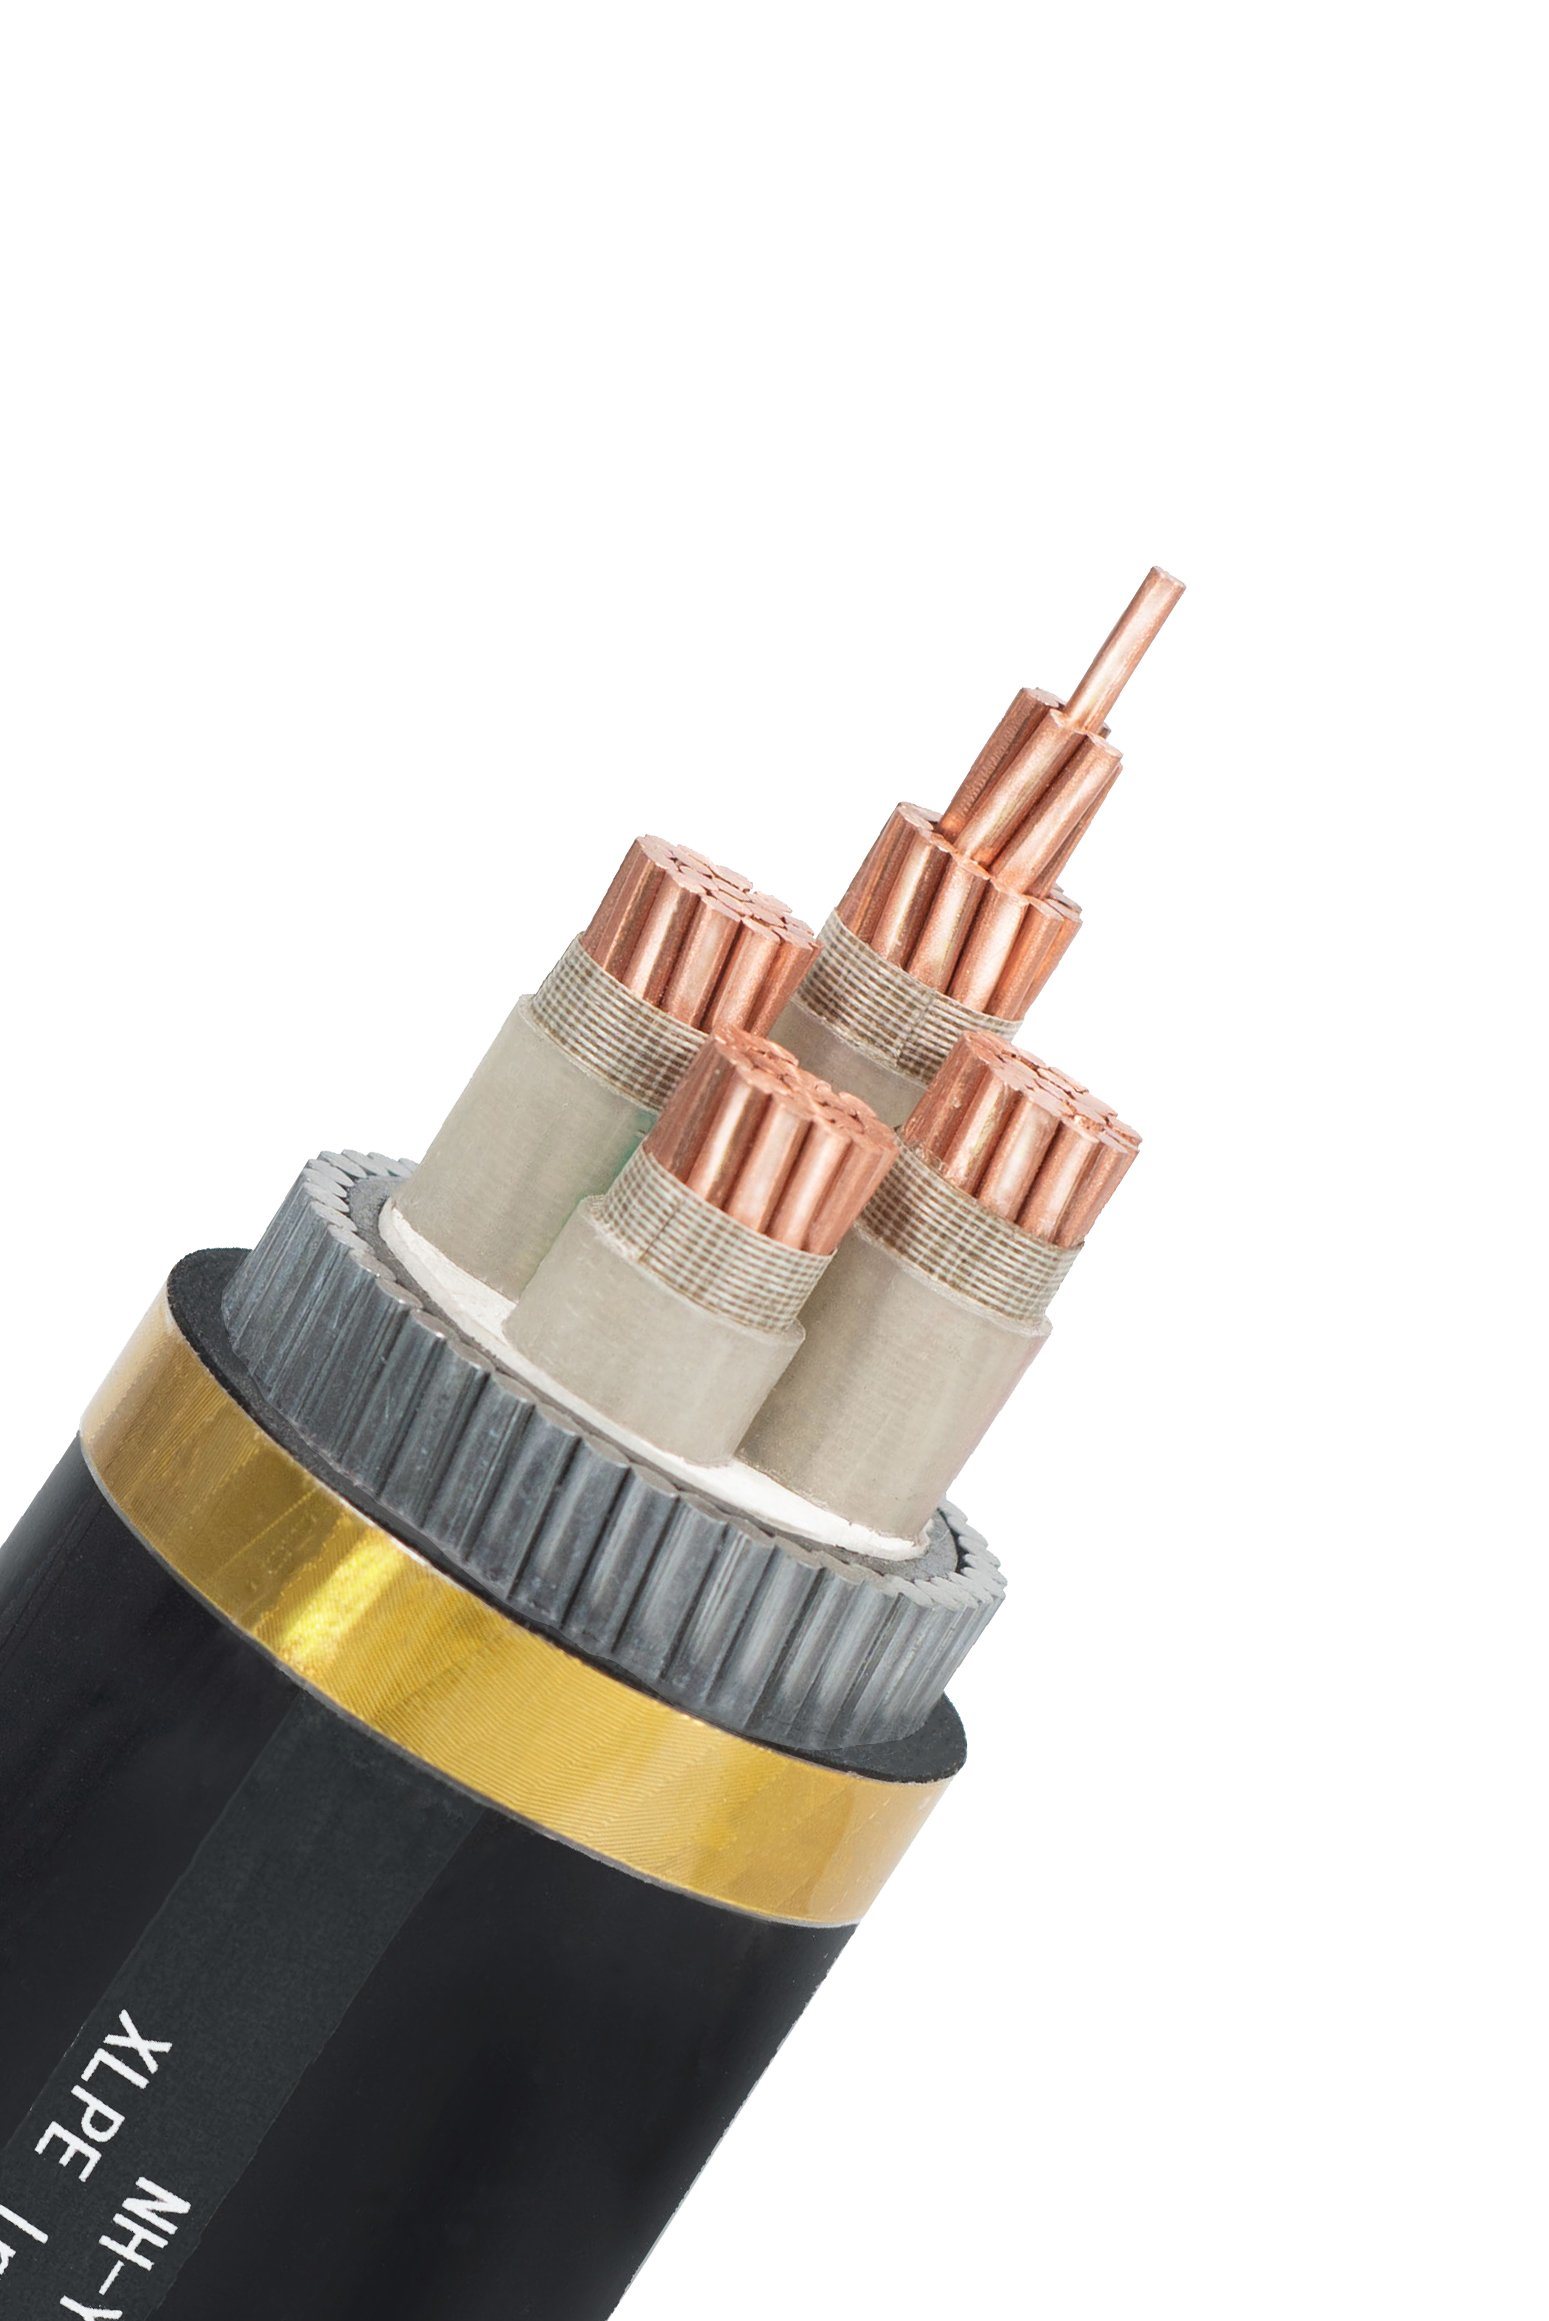 Medium Voltage Compact Stranded Soft Copper Class 2 N2xsy 18/30 Kv Uic 895 XLPE-Tr Insulated